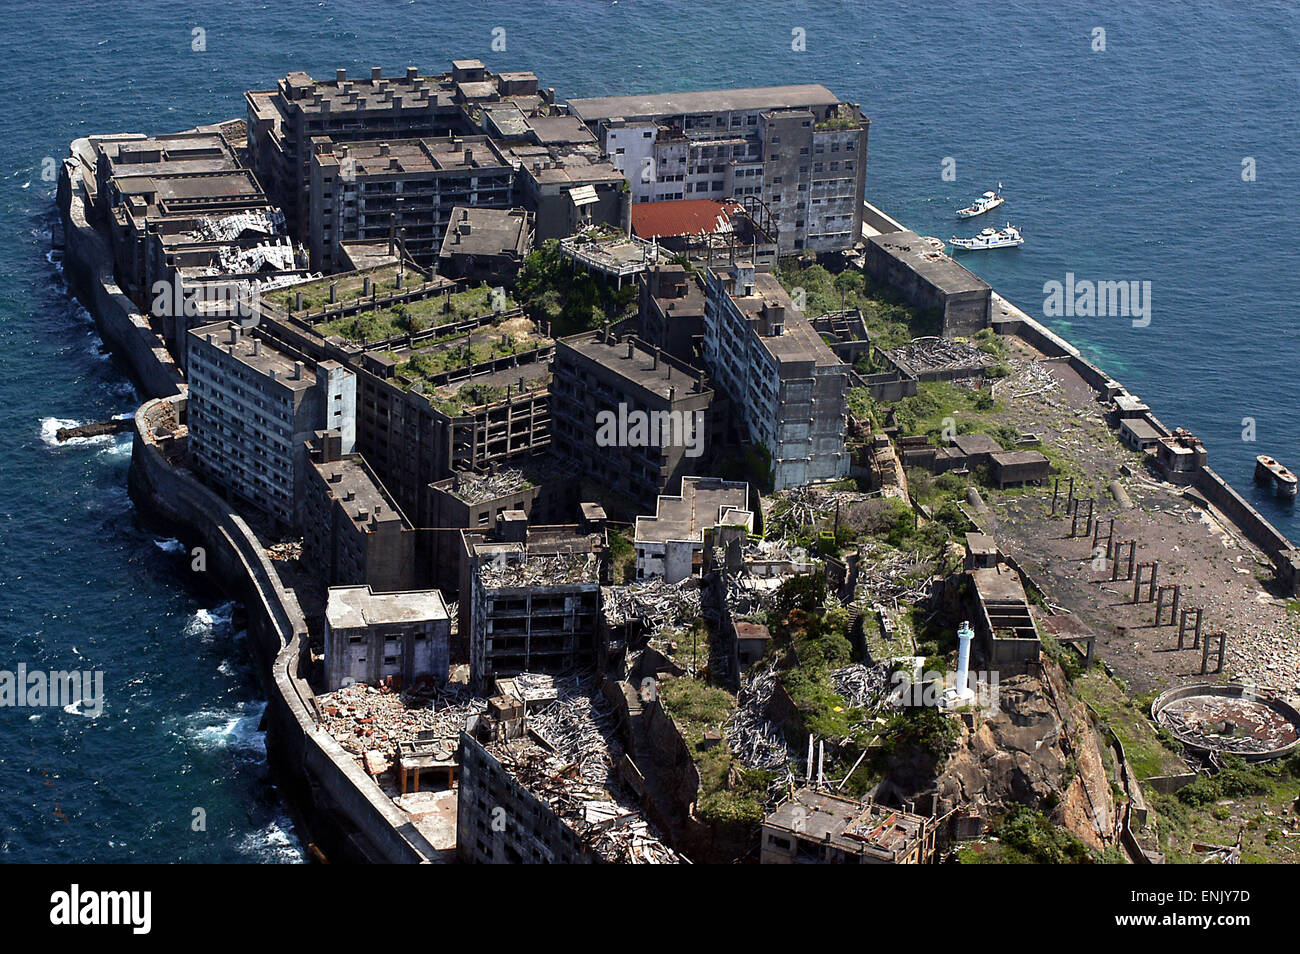 Hashima, Nagasaki, Japan. Also known as Gunkanjima (battleship island), it used to have coal mines and housed over 4,000 inhabitants. After it was abandoned in the mid 20th century the town turned into a ghost town. Stock Photo